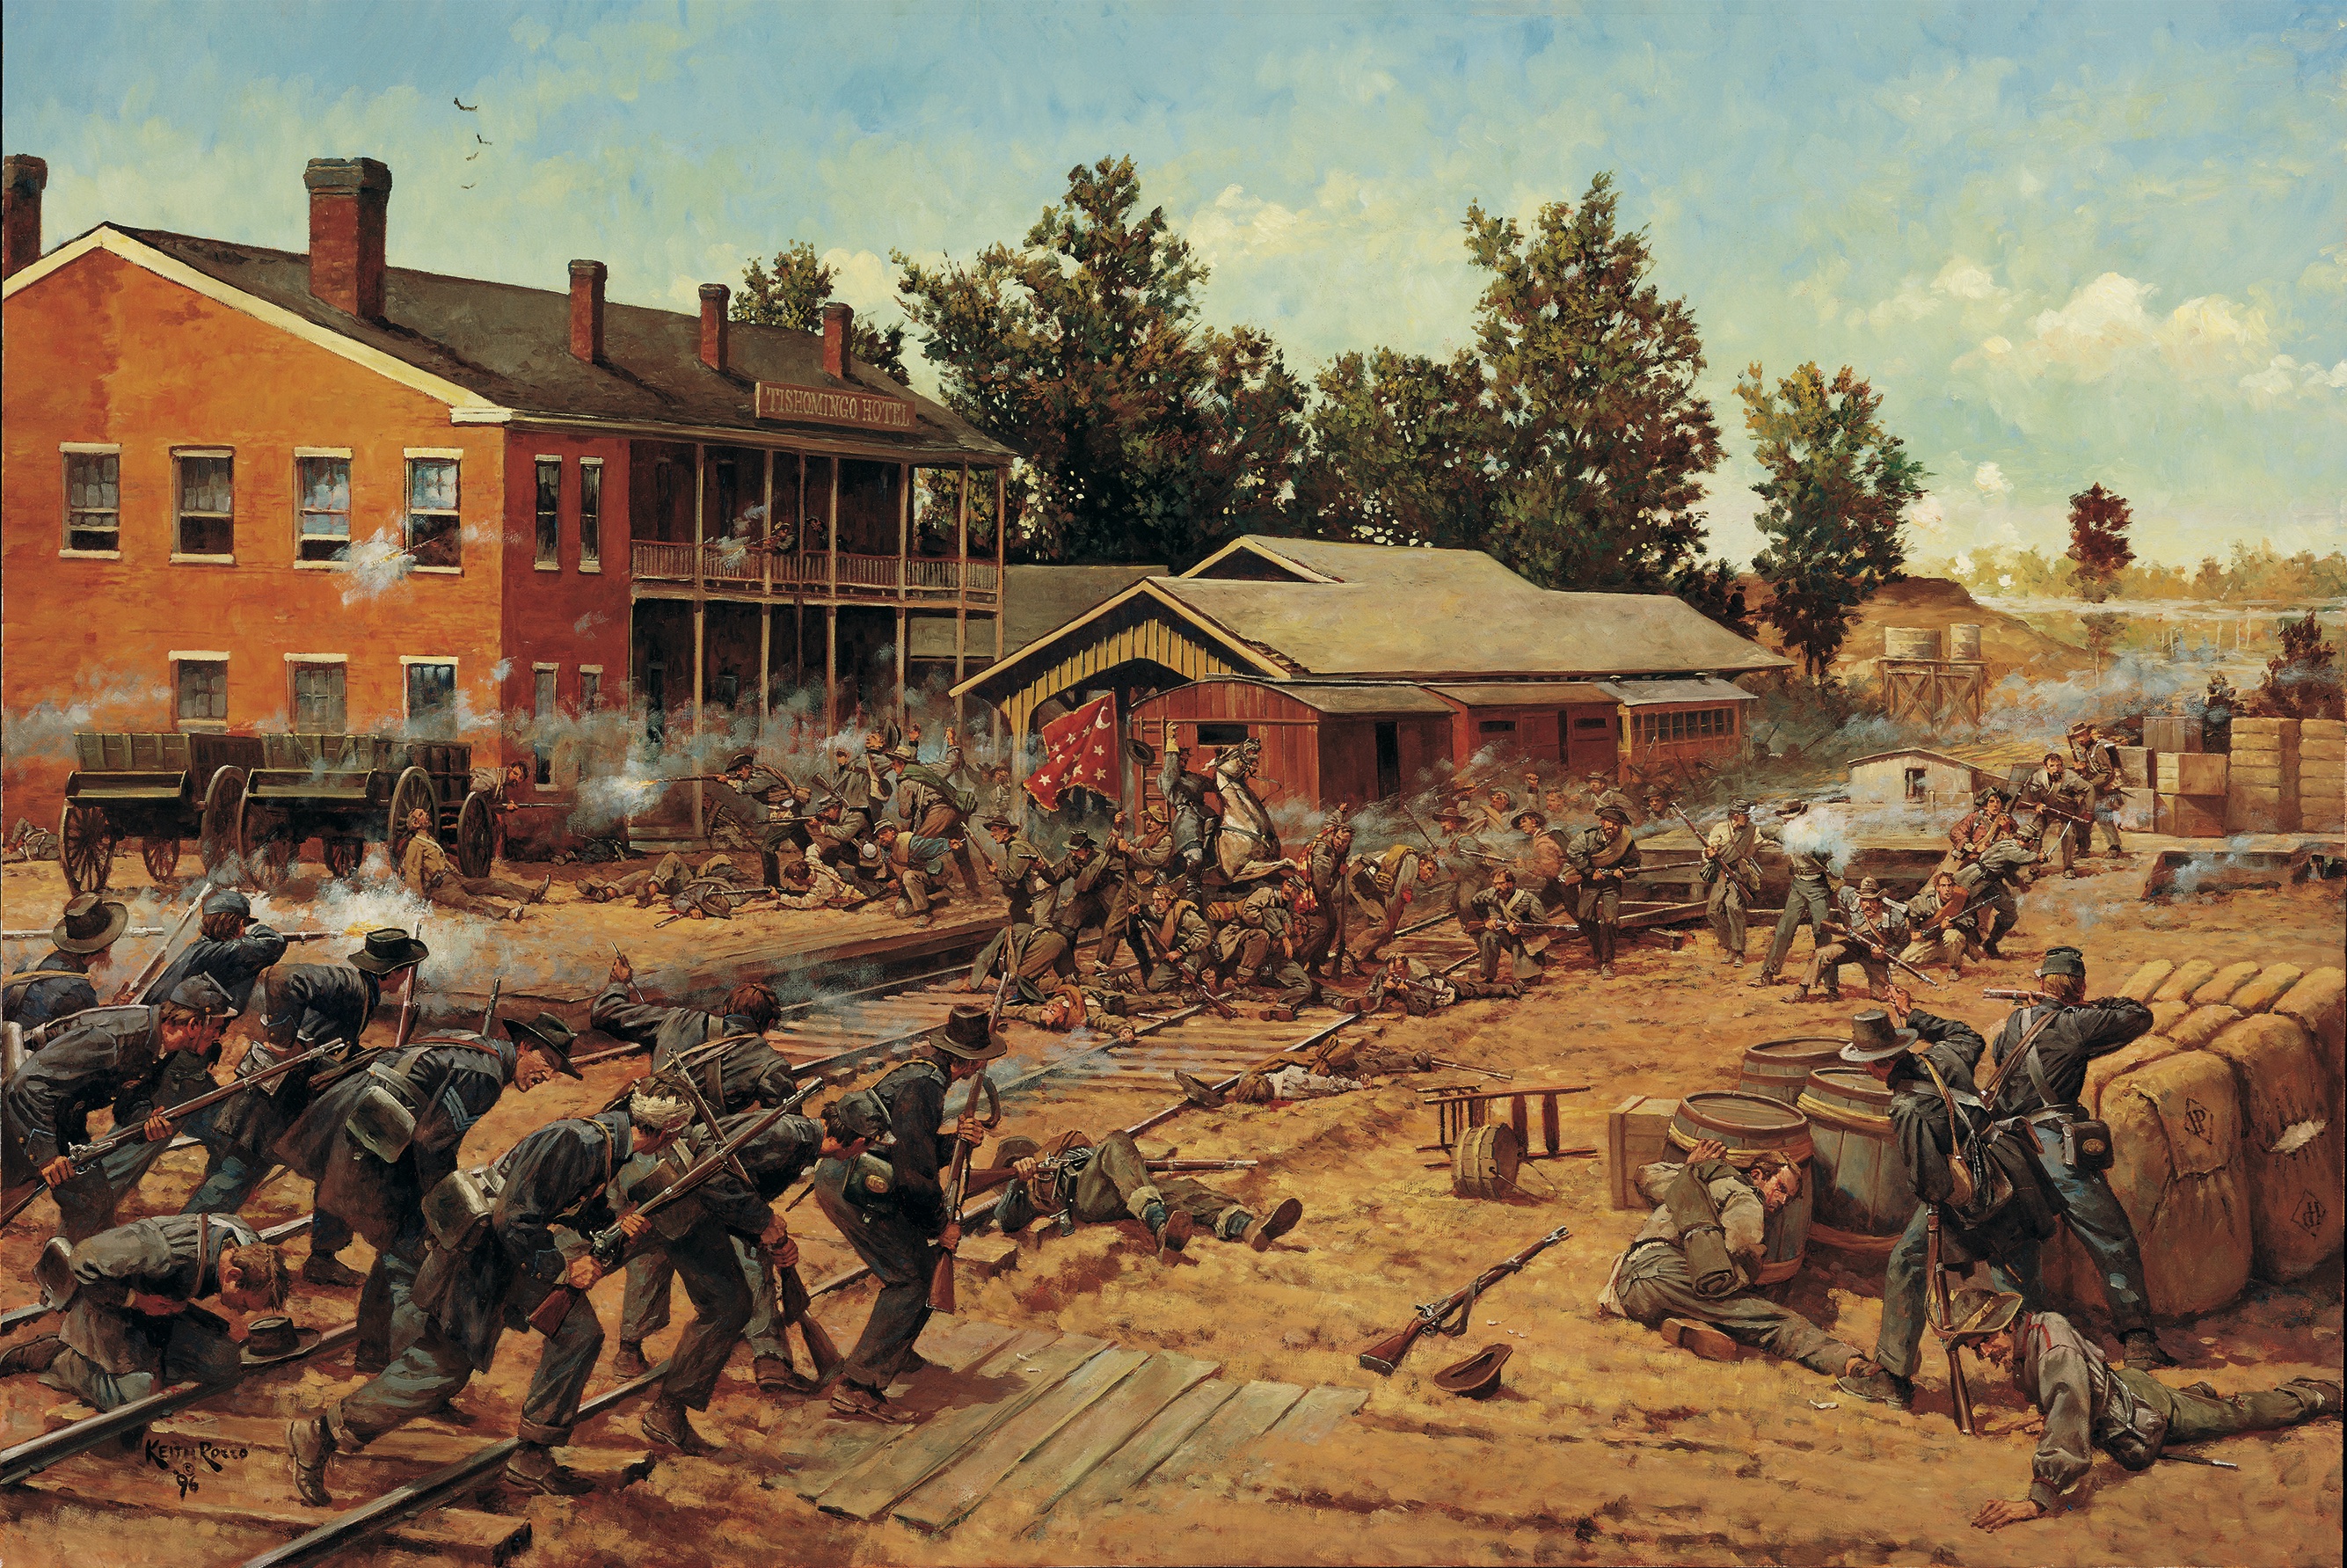 The Tishomingo Hotel at the critical railroad junction of Corinth, Miss., was used as a hospital after the Battle of Shiloh. The fighting shown here occurred during the Second Battle of Corinth in October 1862. (Keith Rocco)